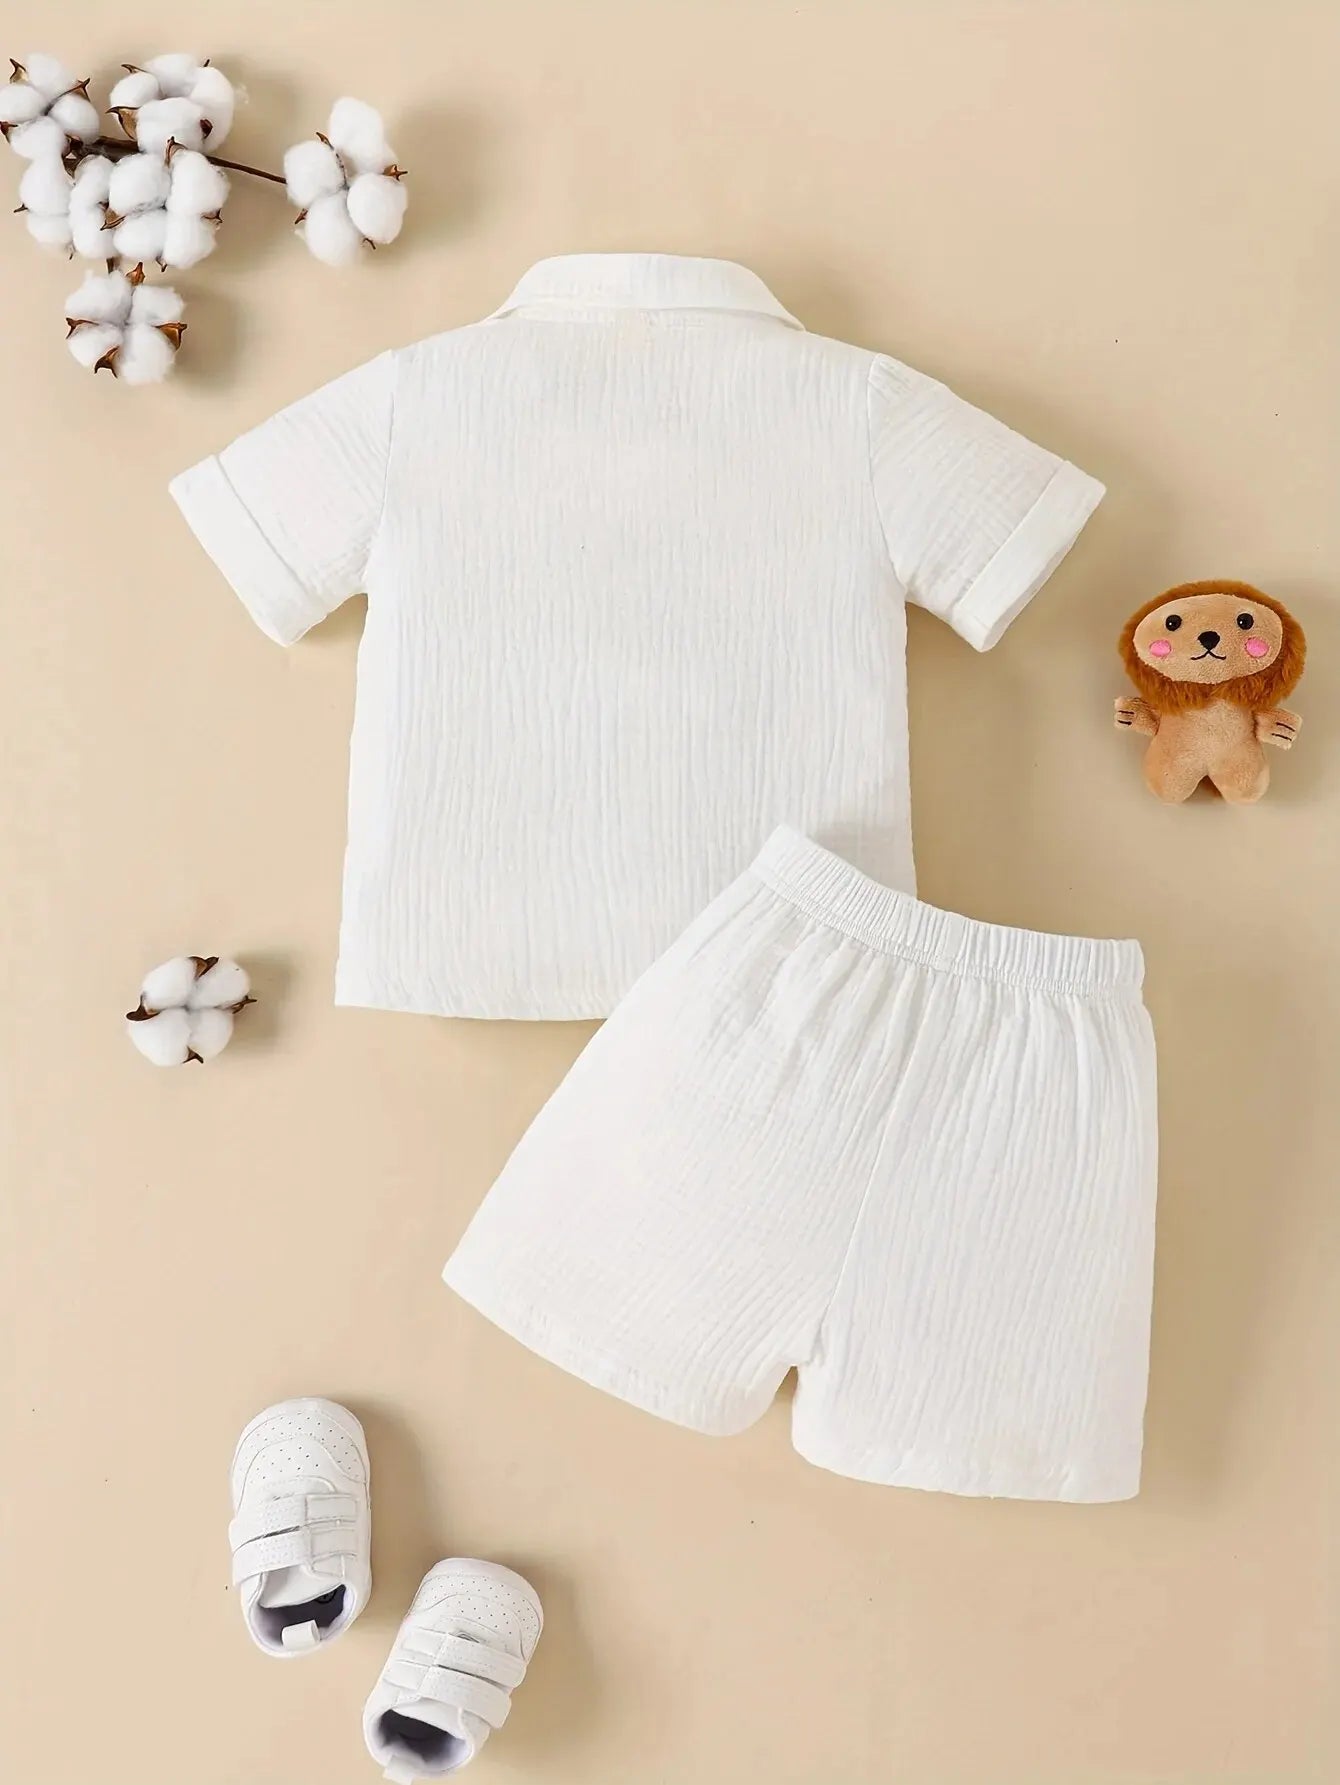 Kids' 2-piece Casual Cotton Shirt & Shorts Set for Boys and Girls